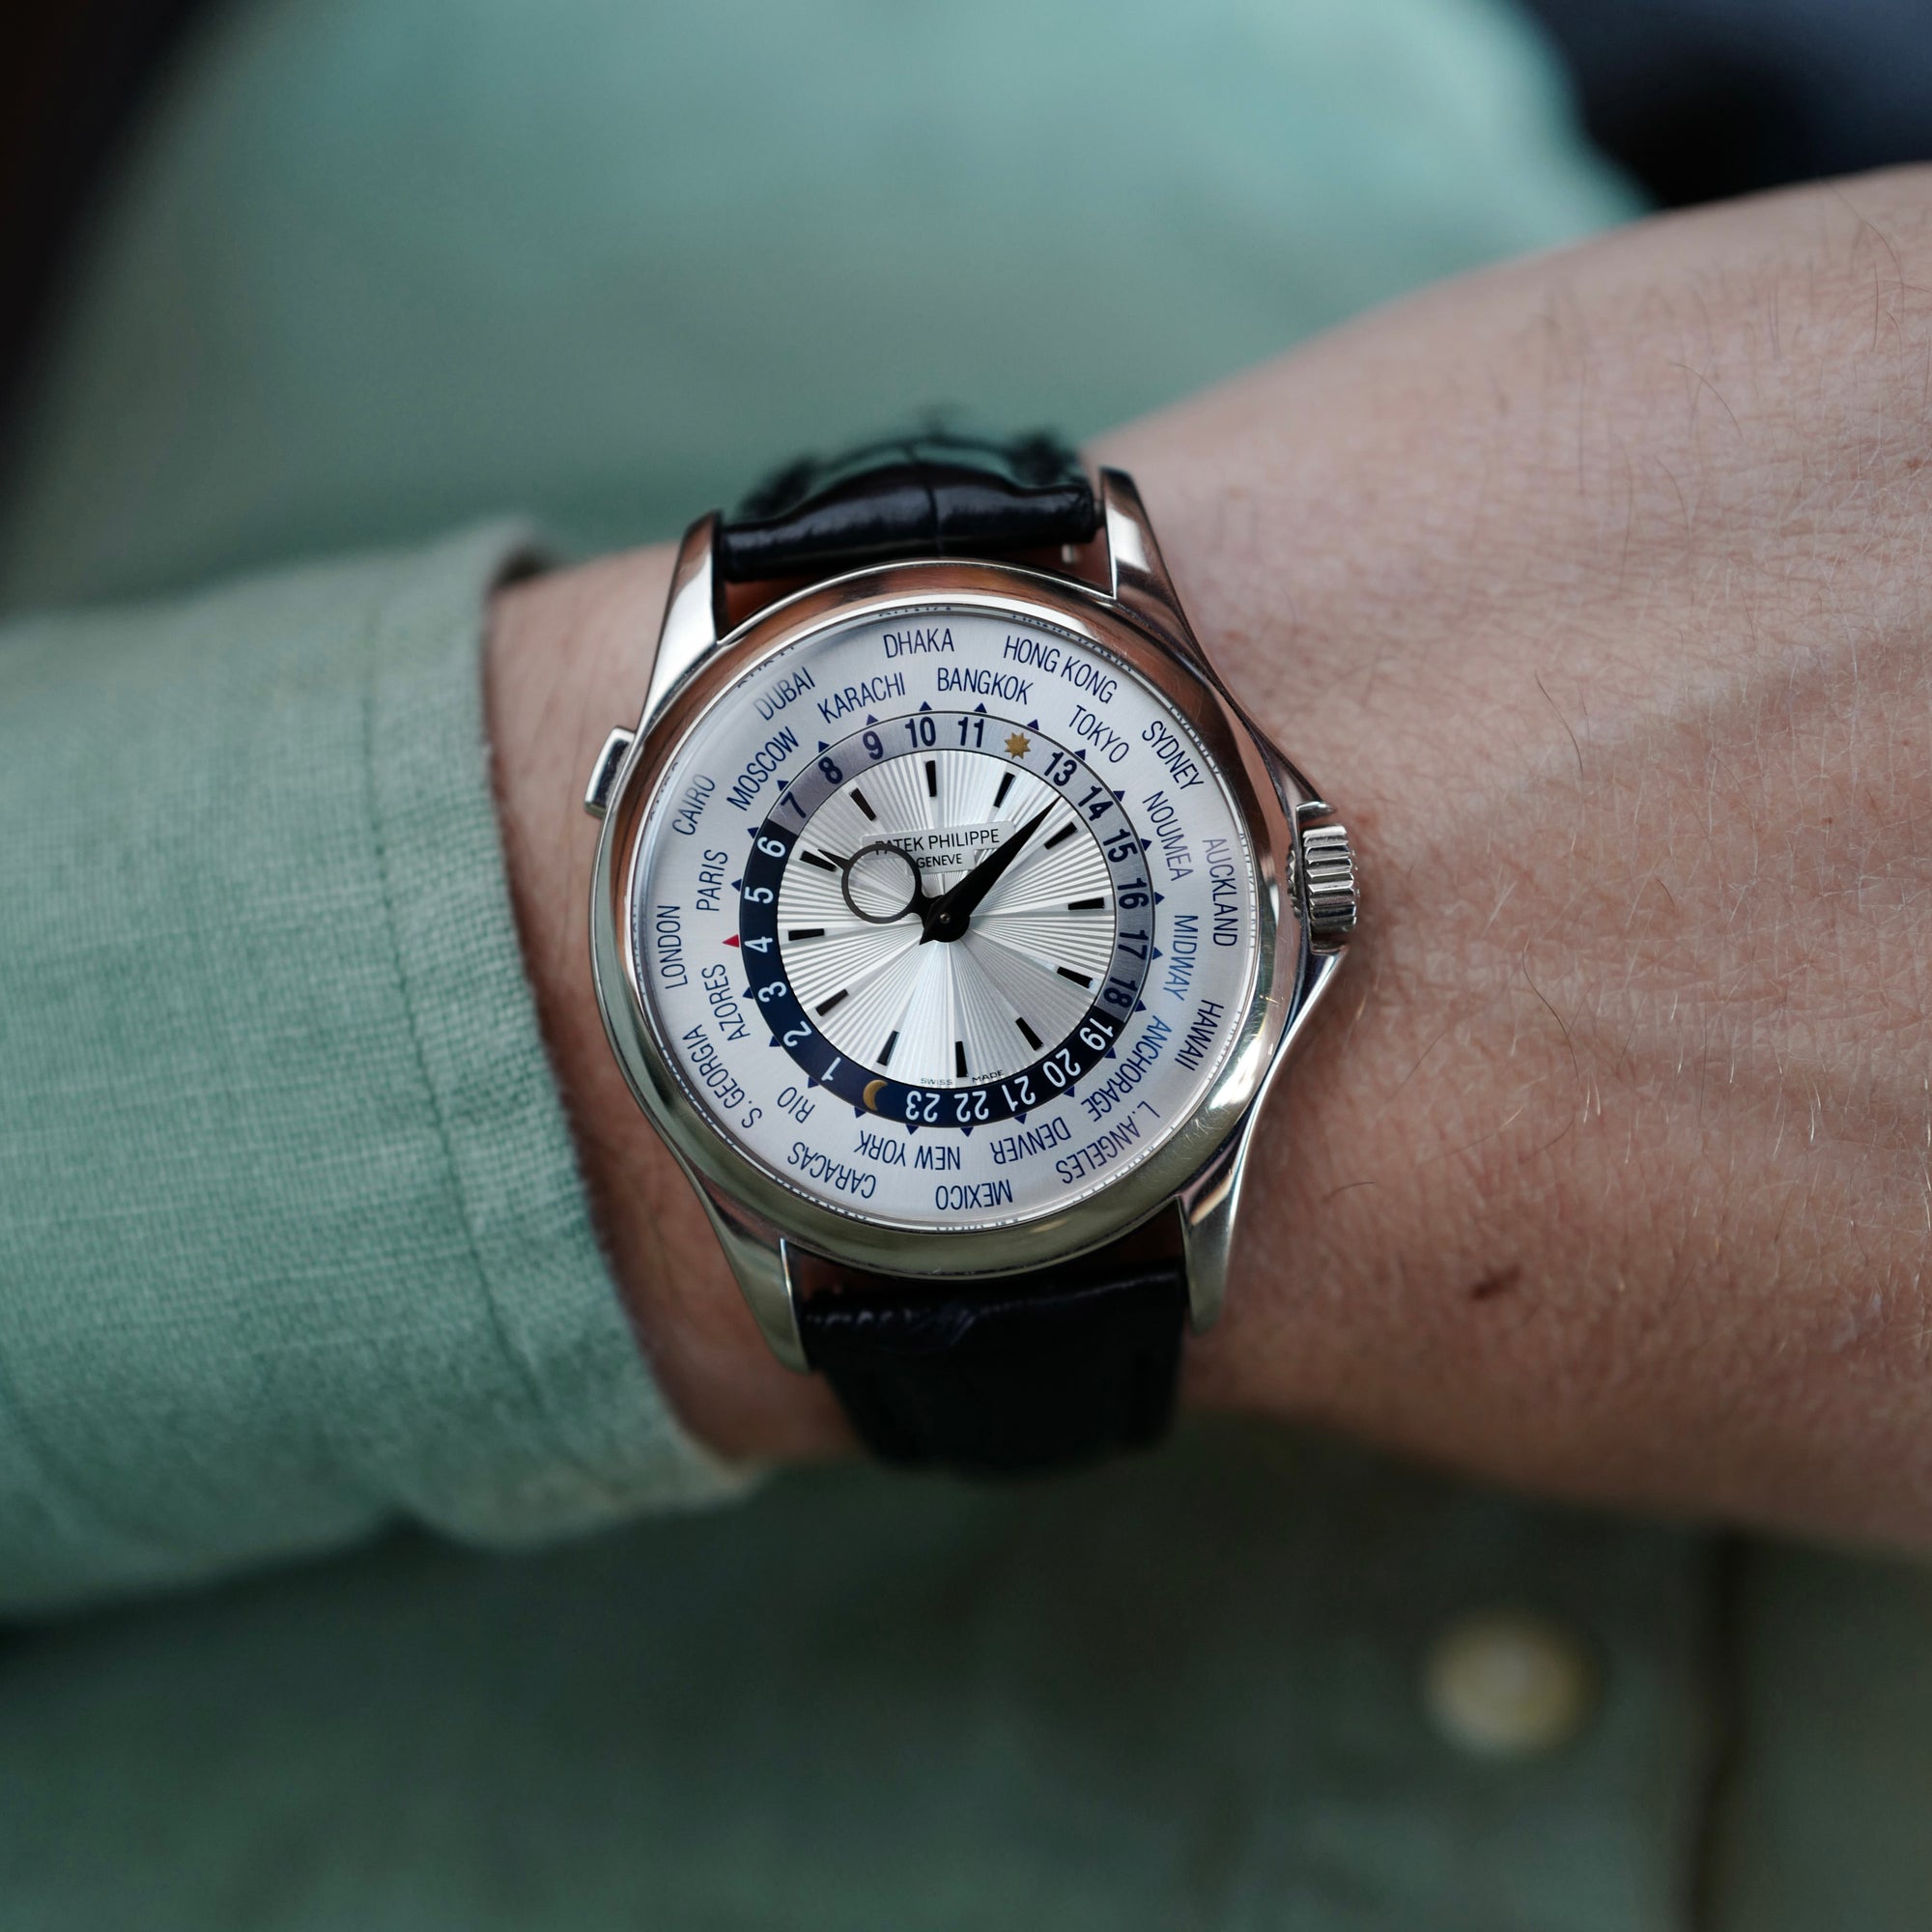 Patek Philippe - Patek Philippe White Gold World Time Watch Ref. 5130 (NEW ARRIVAL) - The Keystone Watches